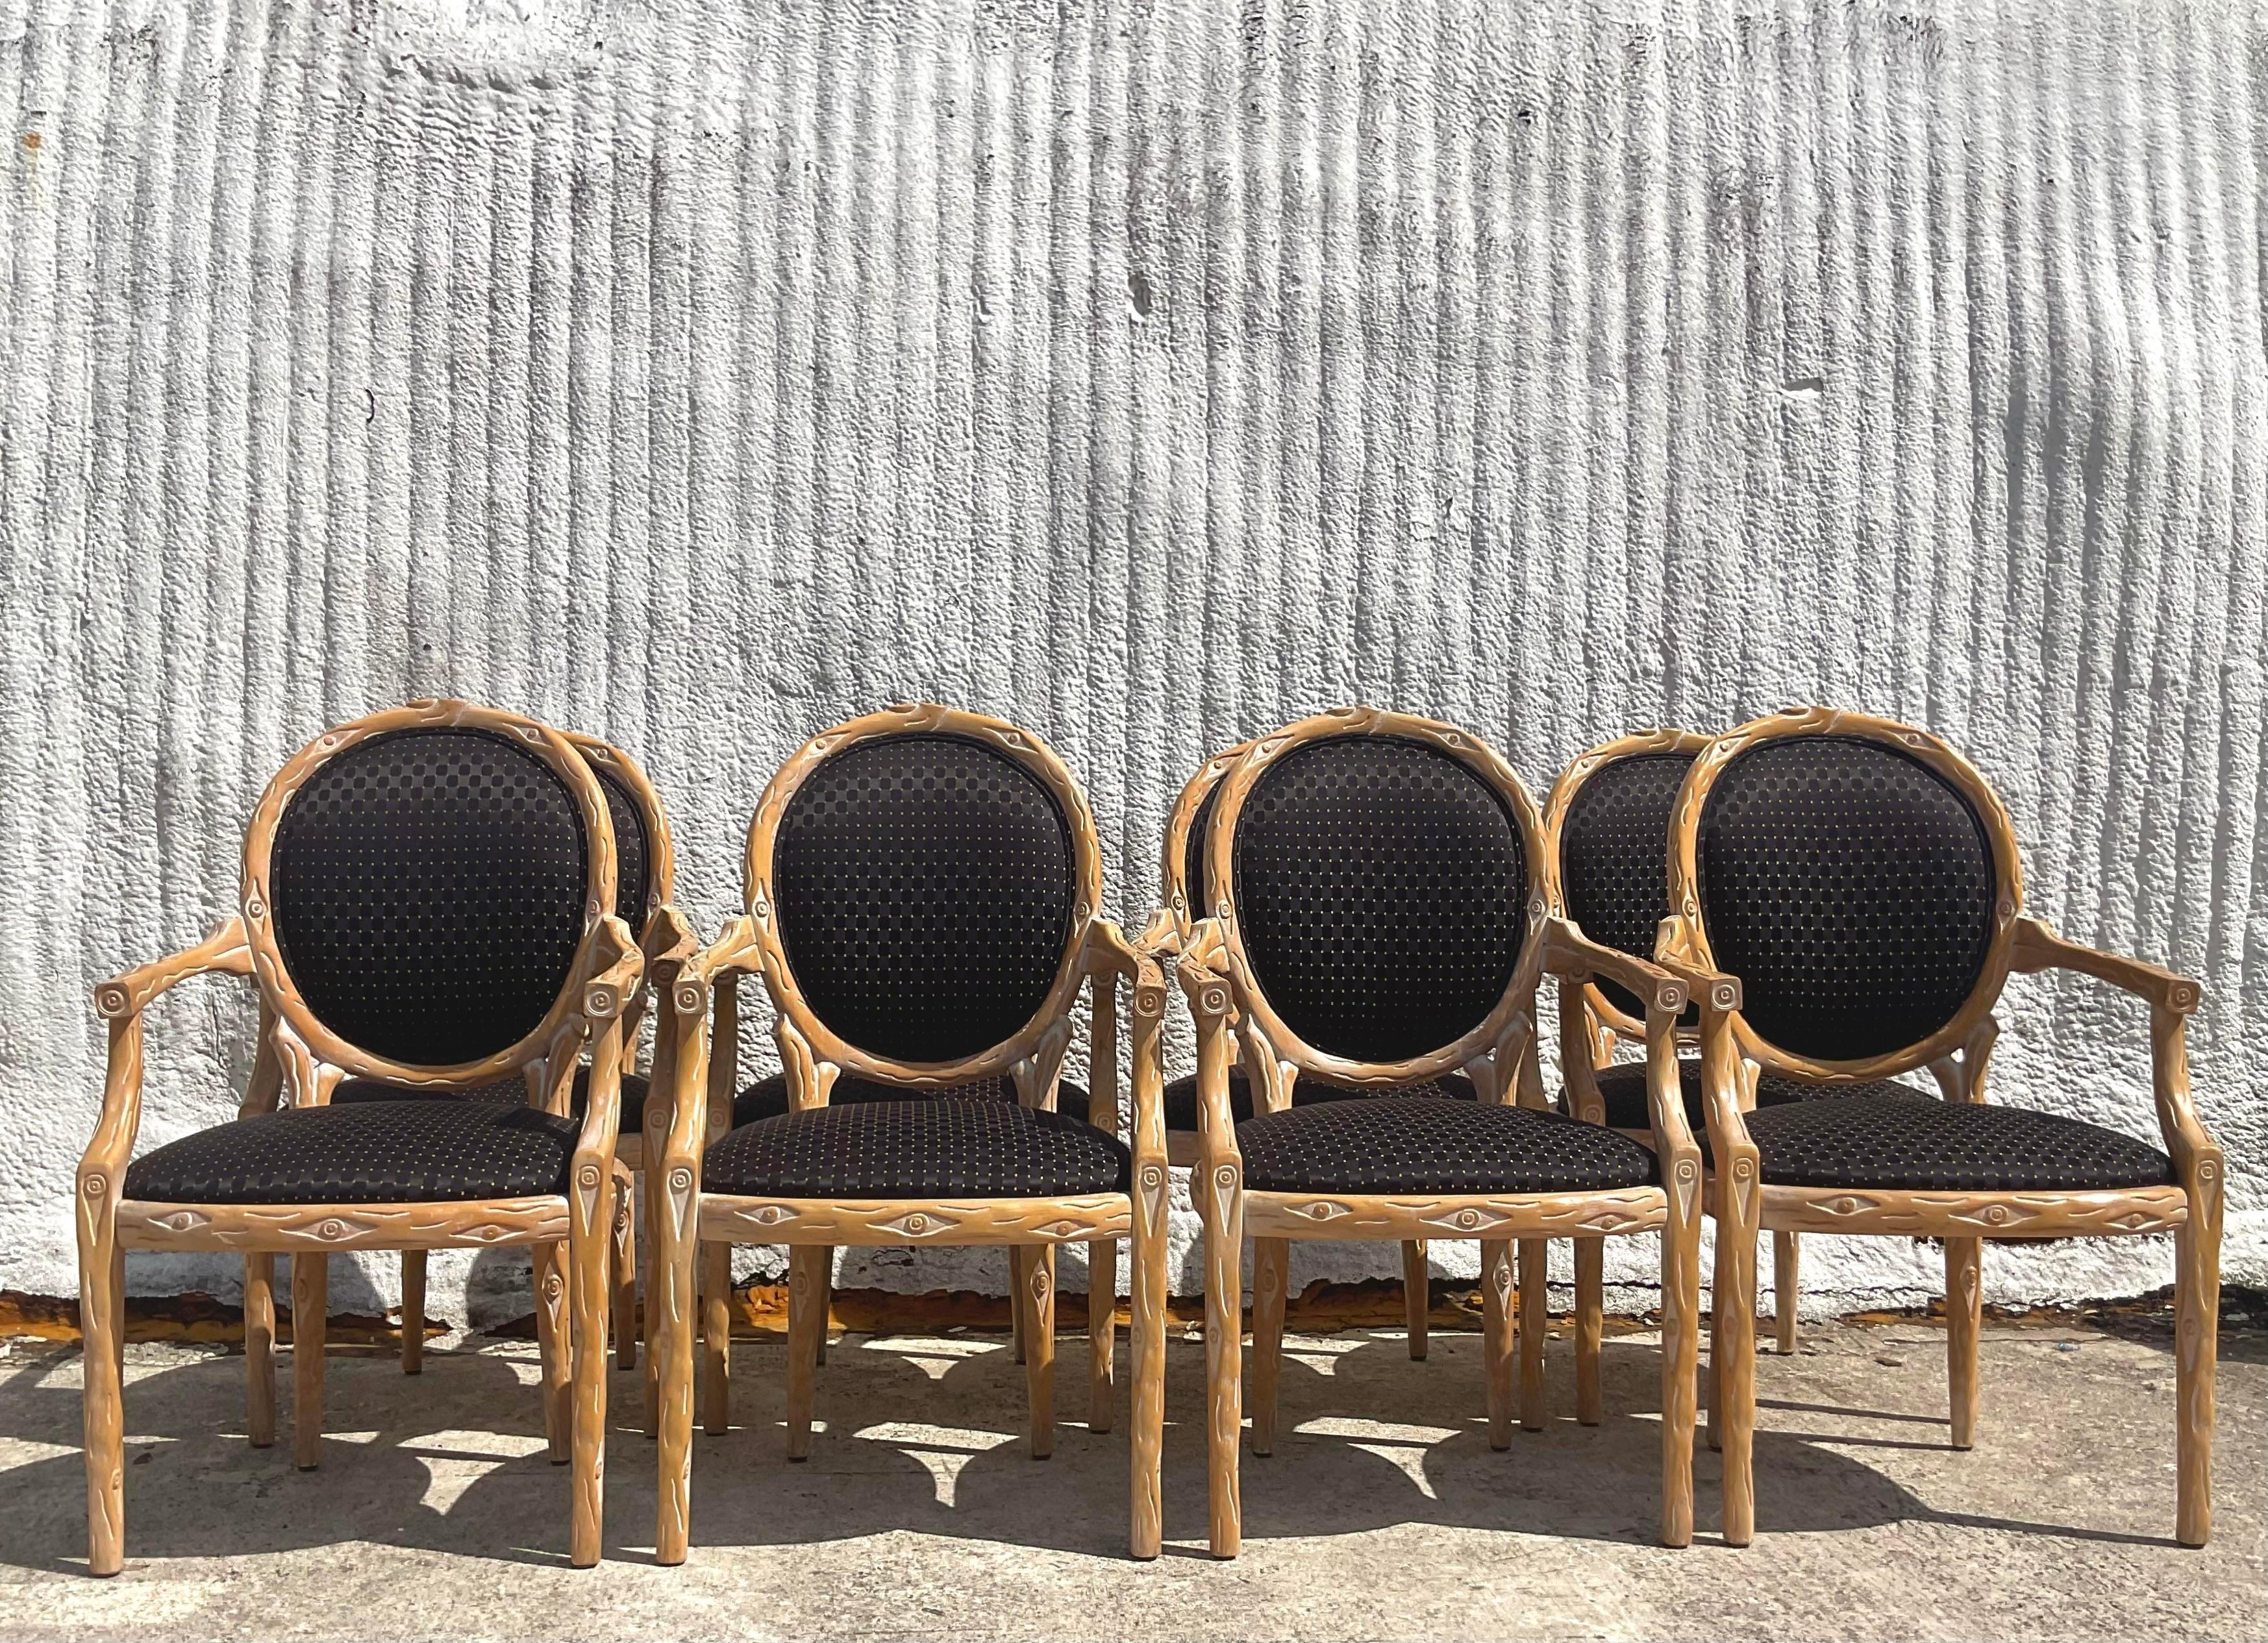 Vintage Boho Faux Bois Dining Chairs - Set of 8 In Good Condition For Sale In west palm beach, FL